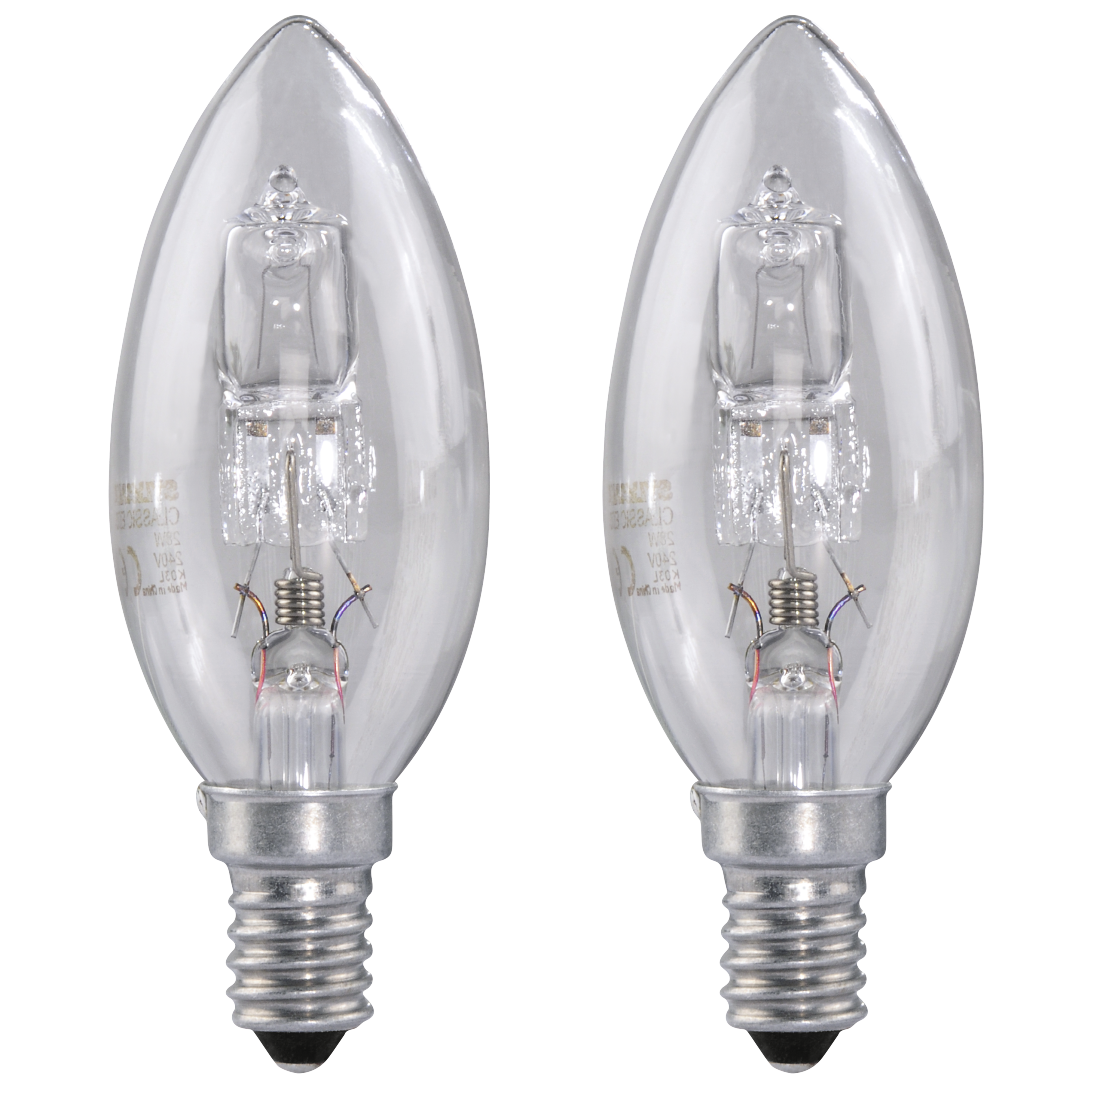 abx High-Res Image - Xavax, Halogen Candle Bulb, E14, 20W, warm white, 2 pieces